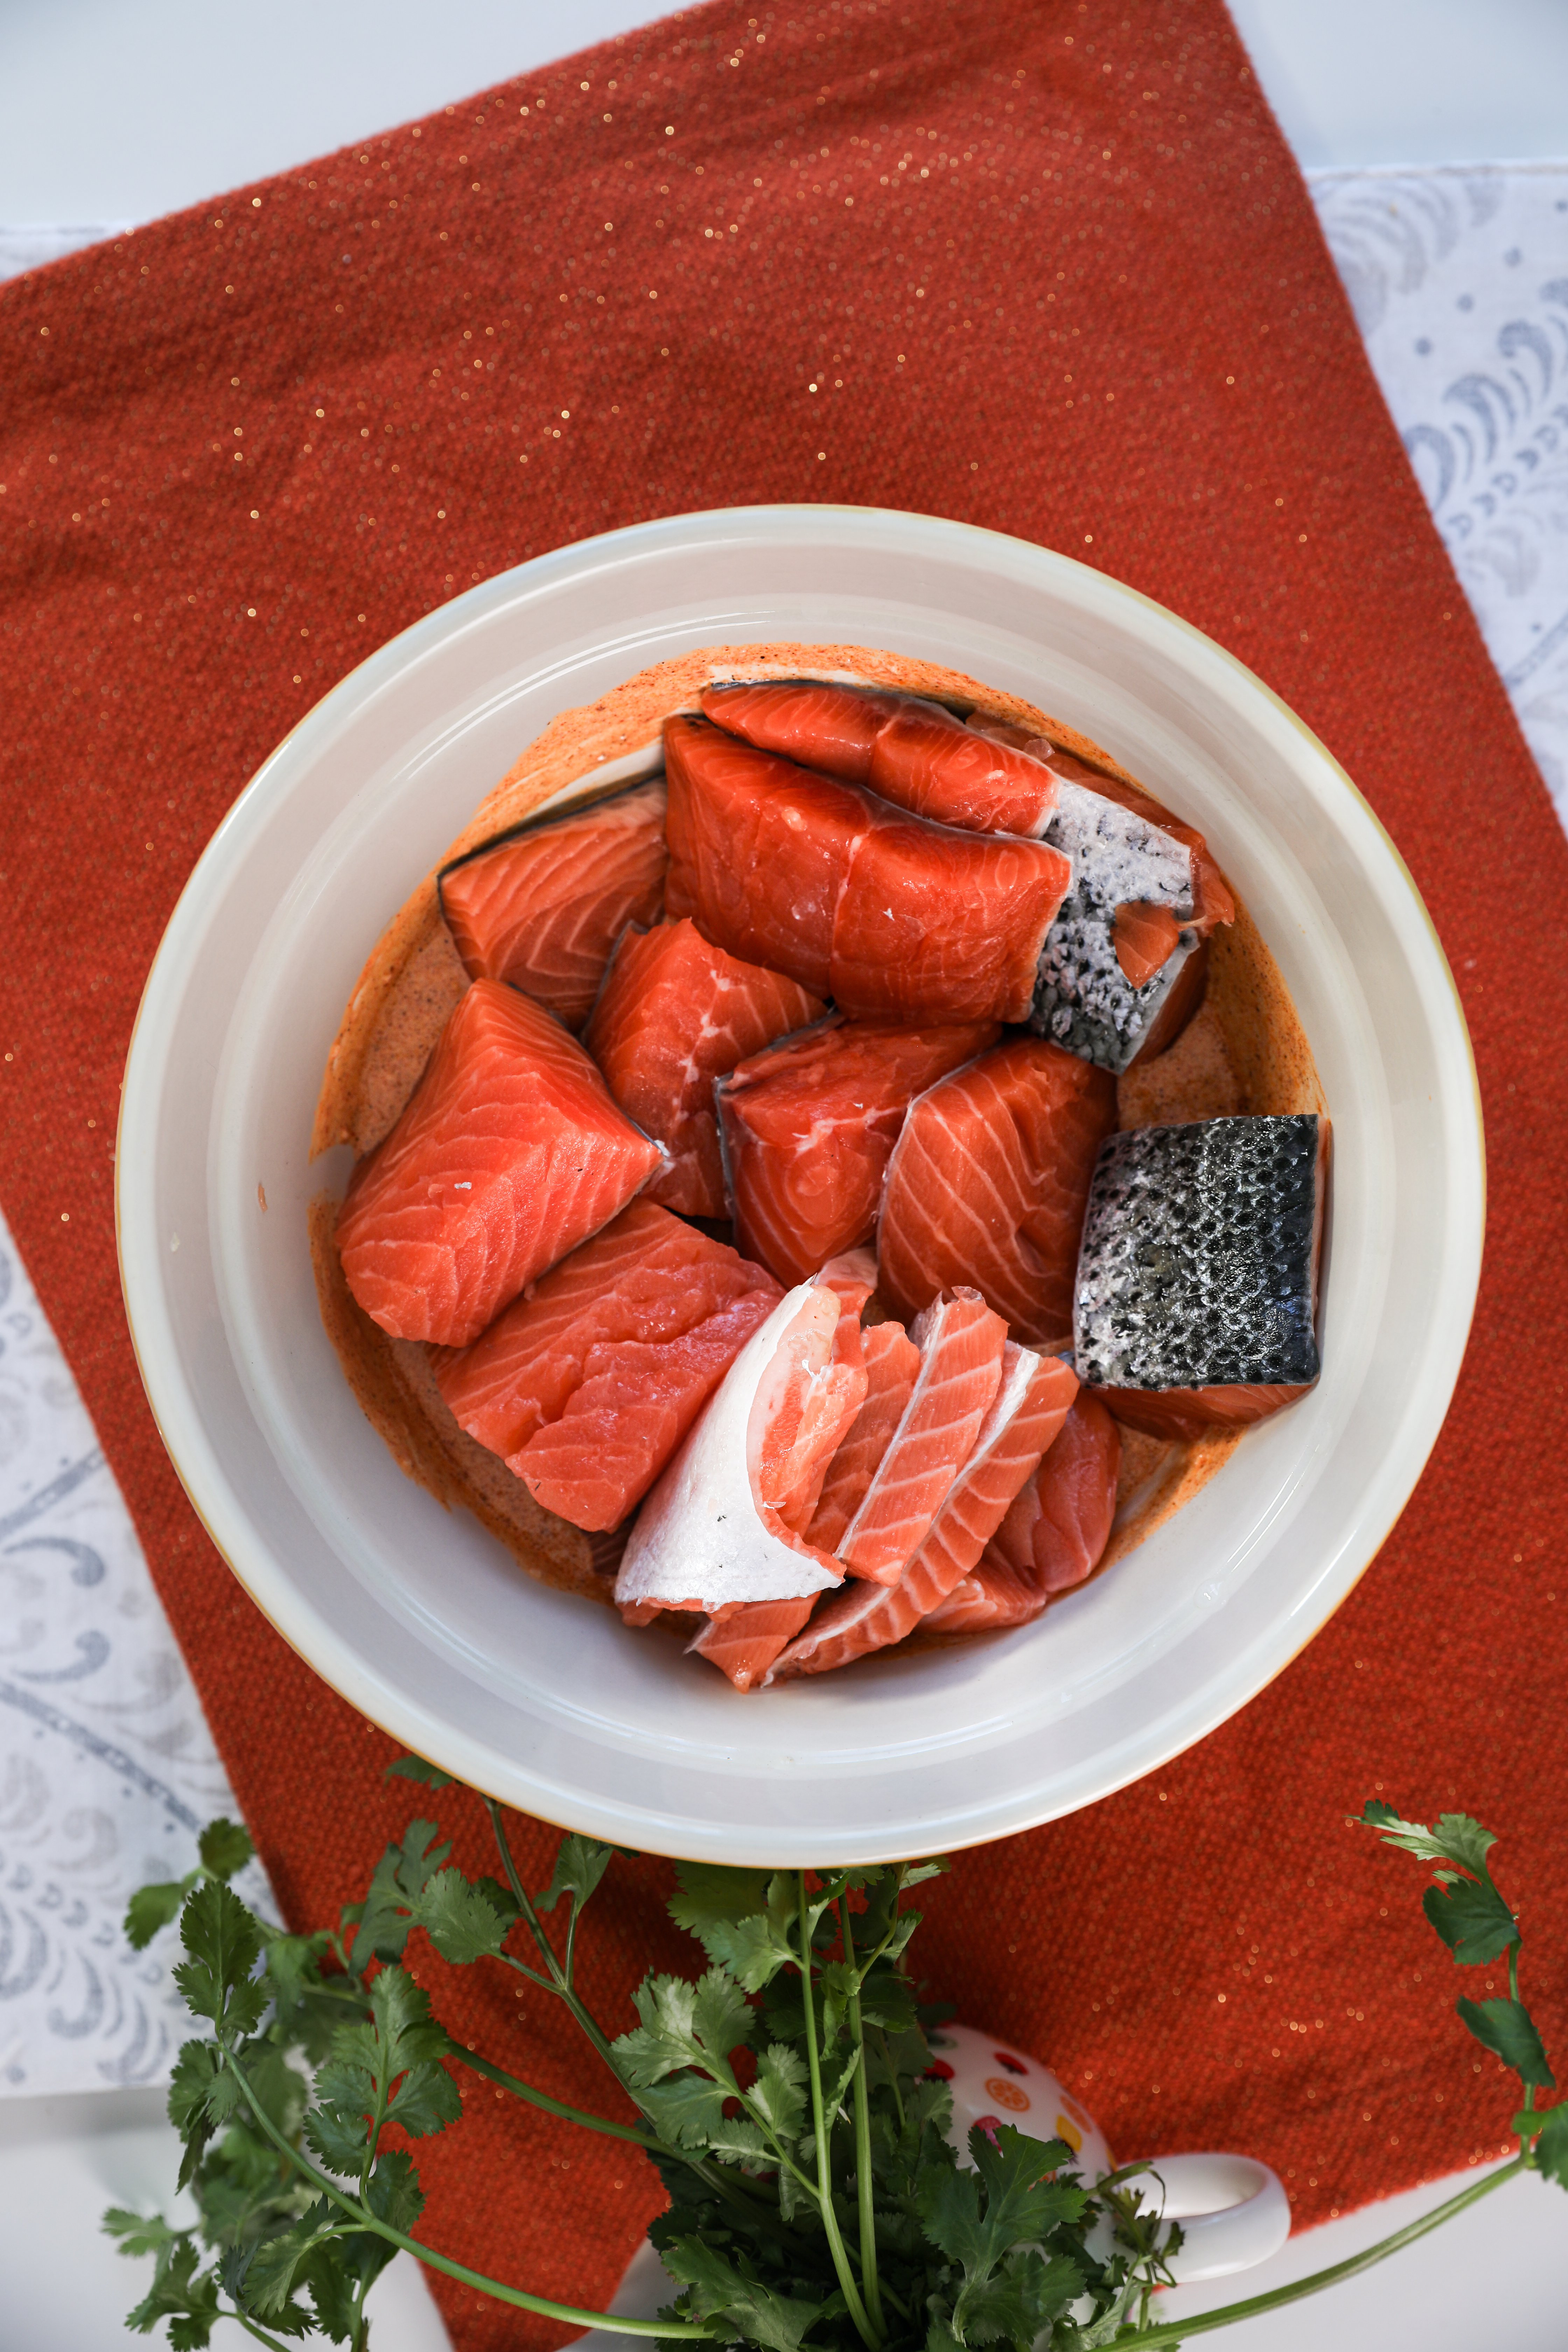 A bowl containing fresh salmon pieces sits on an orange mat.